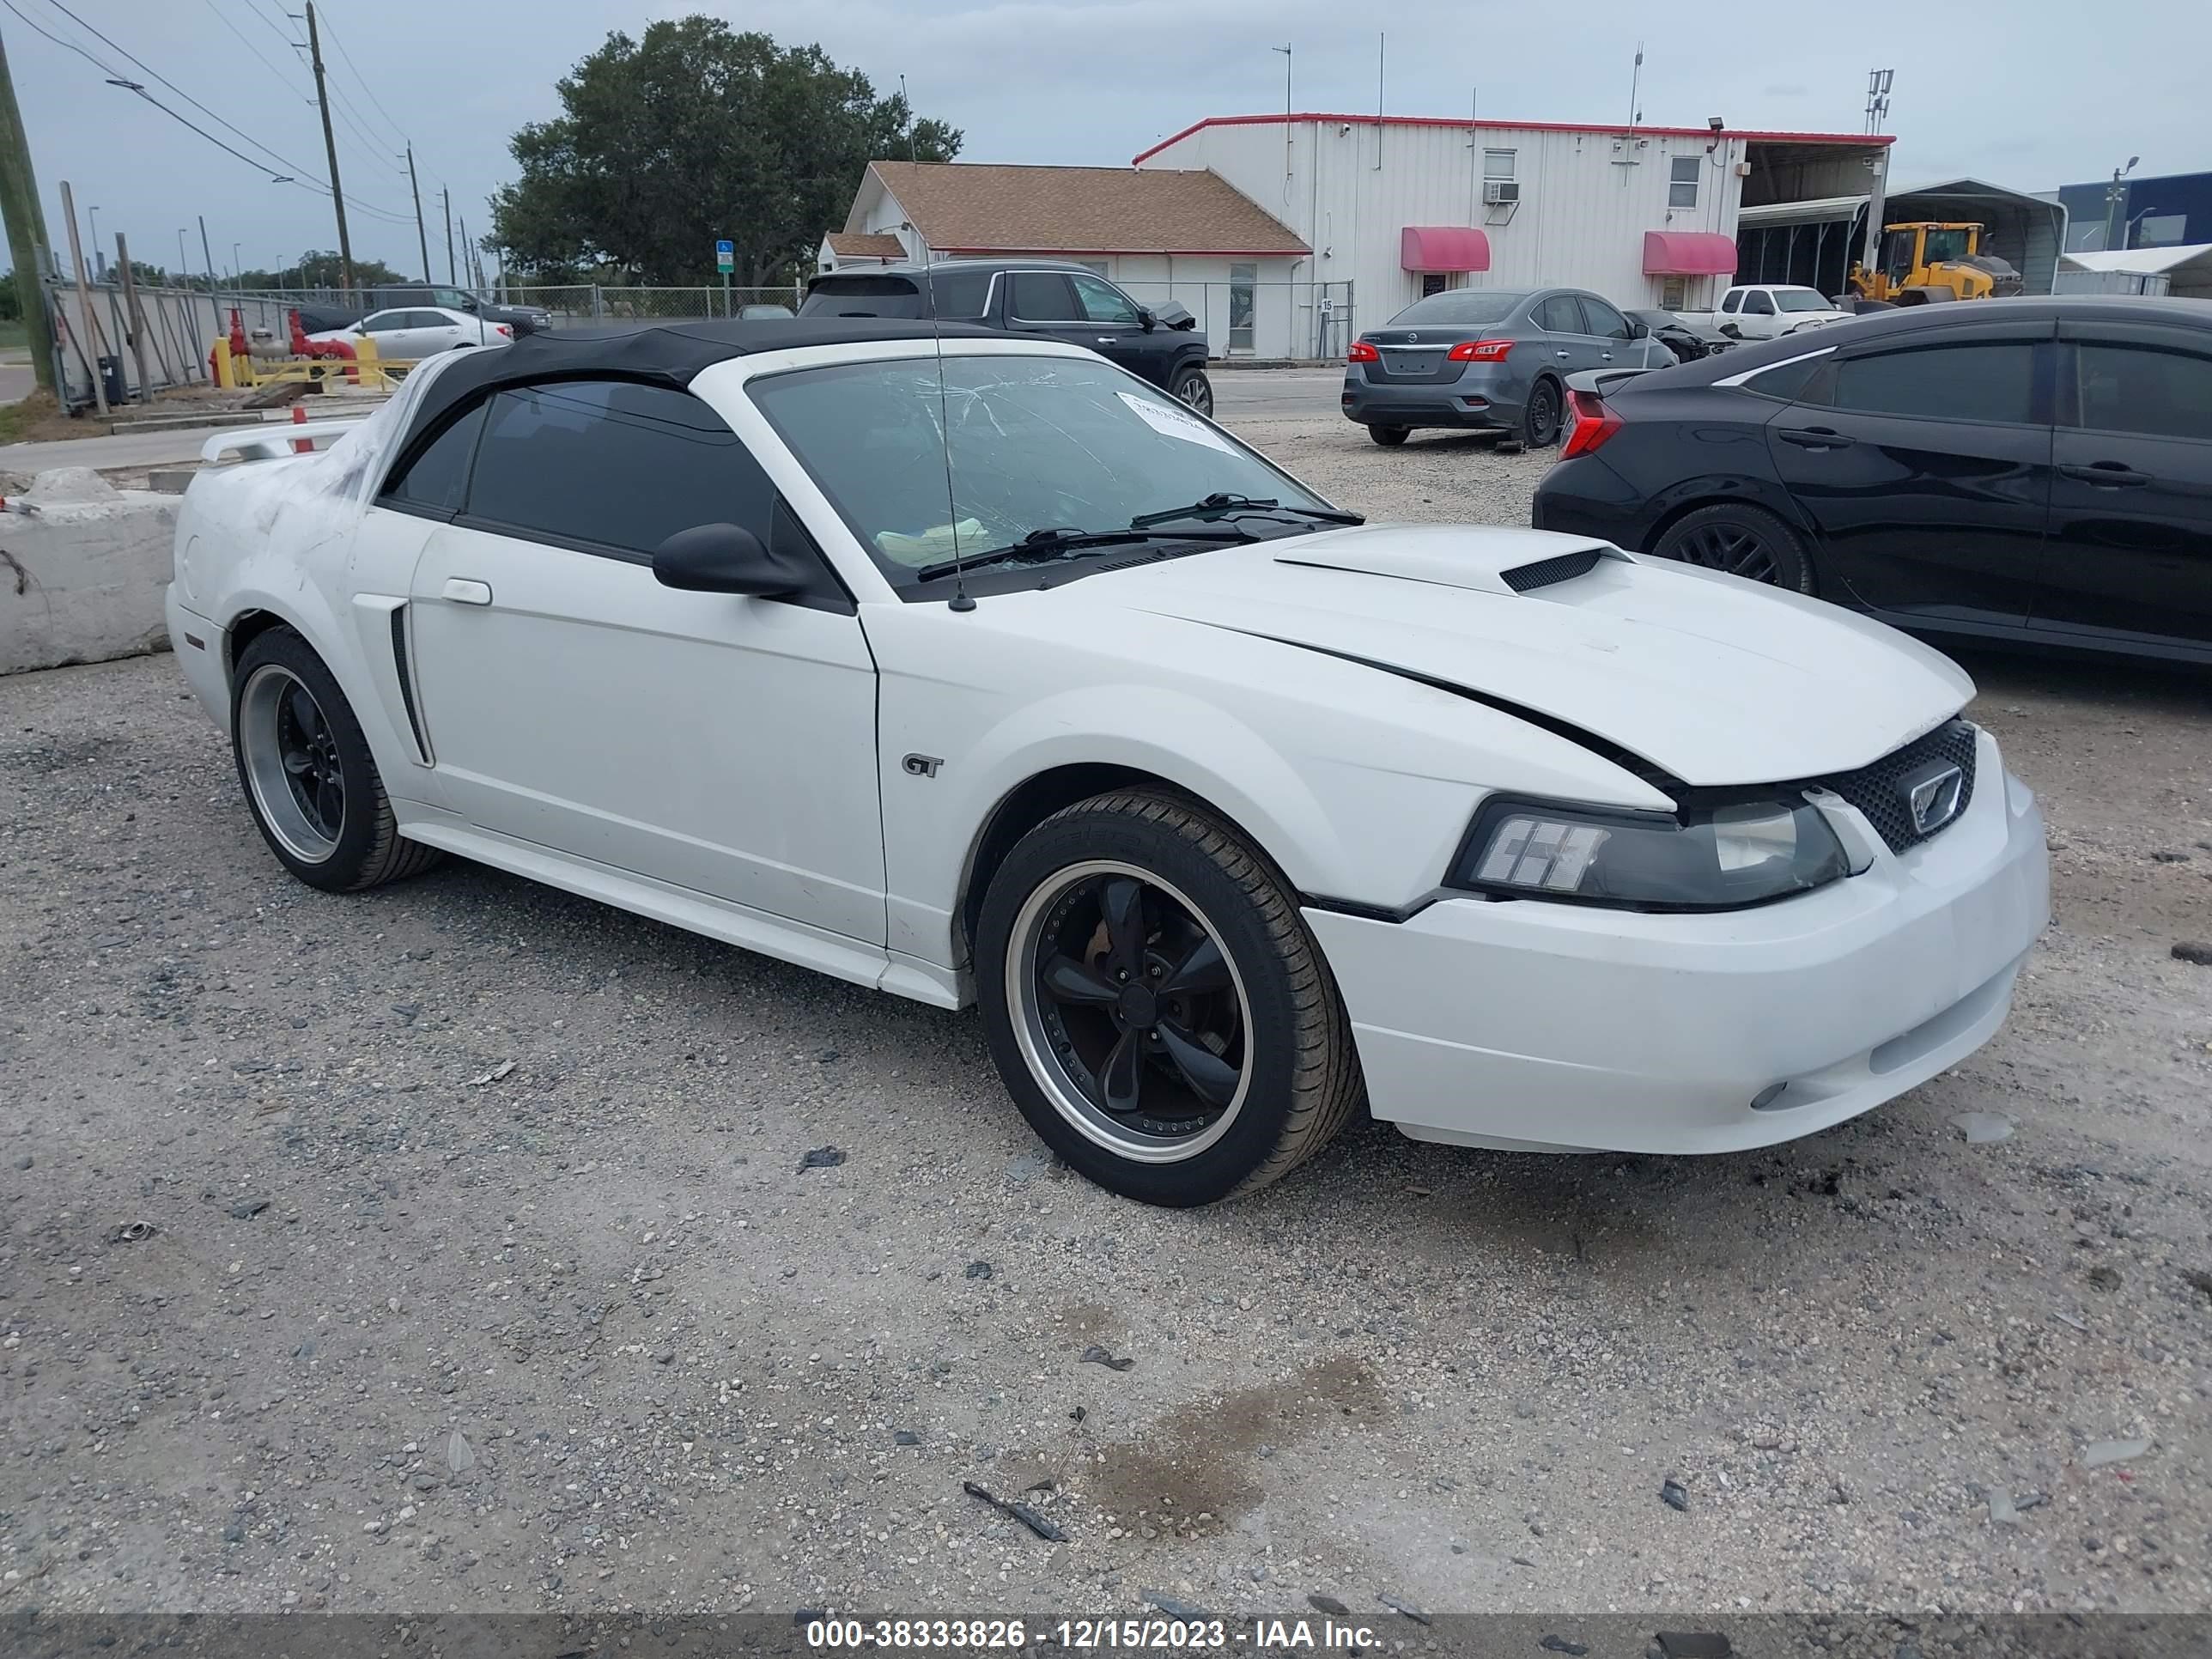 VIN: 1FAFP45X83F454040 - ford mustang